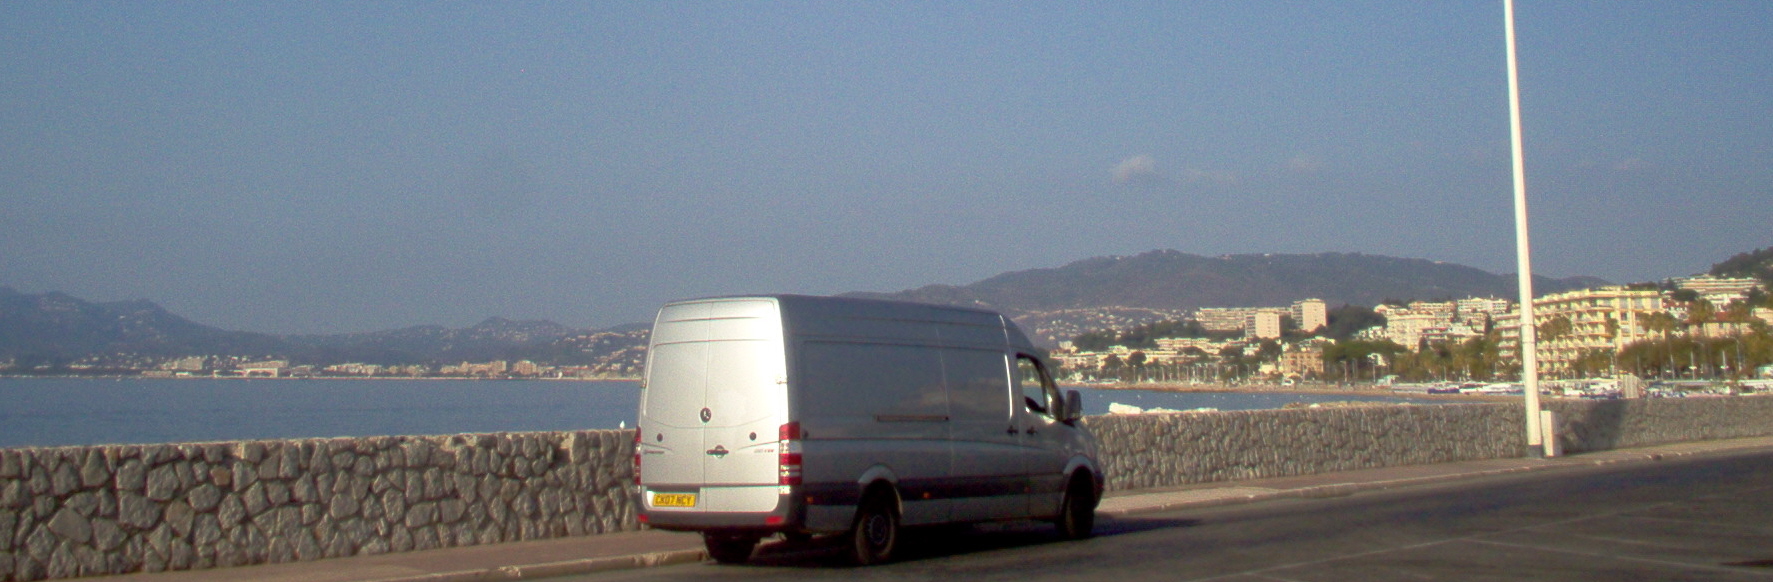 Removals to the South of France